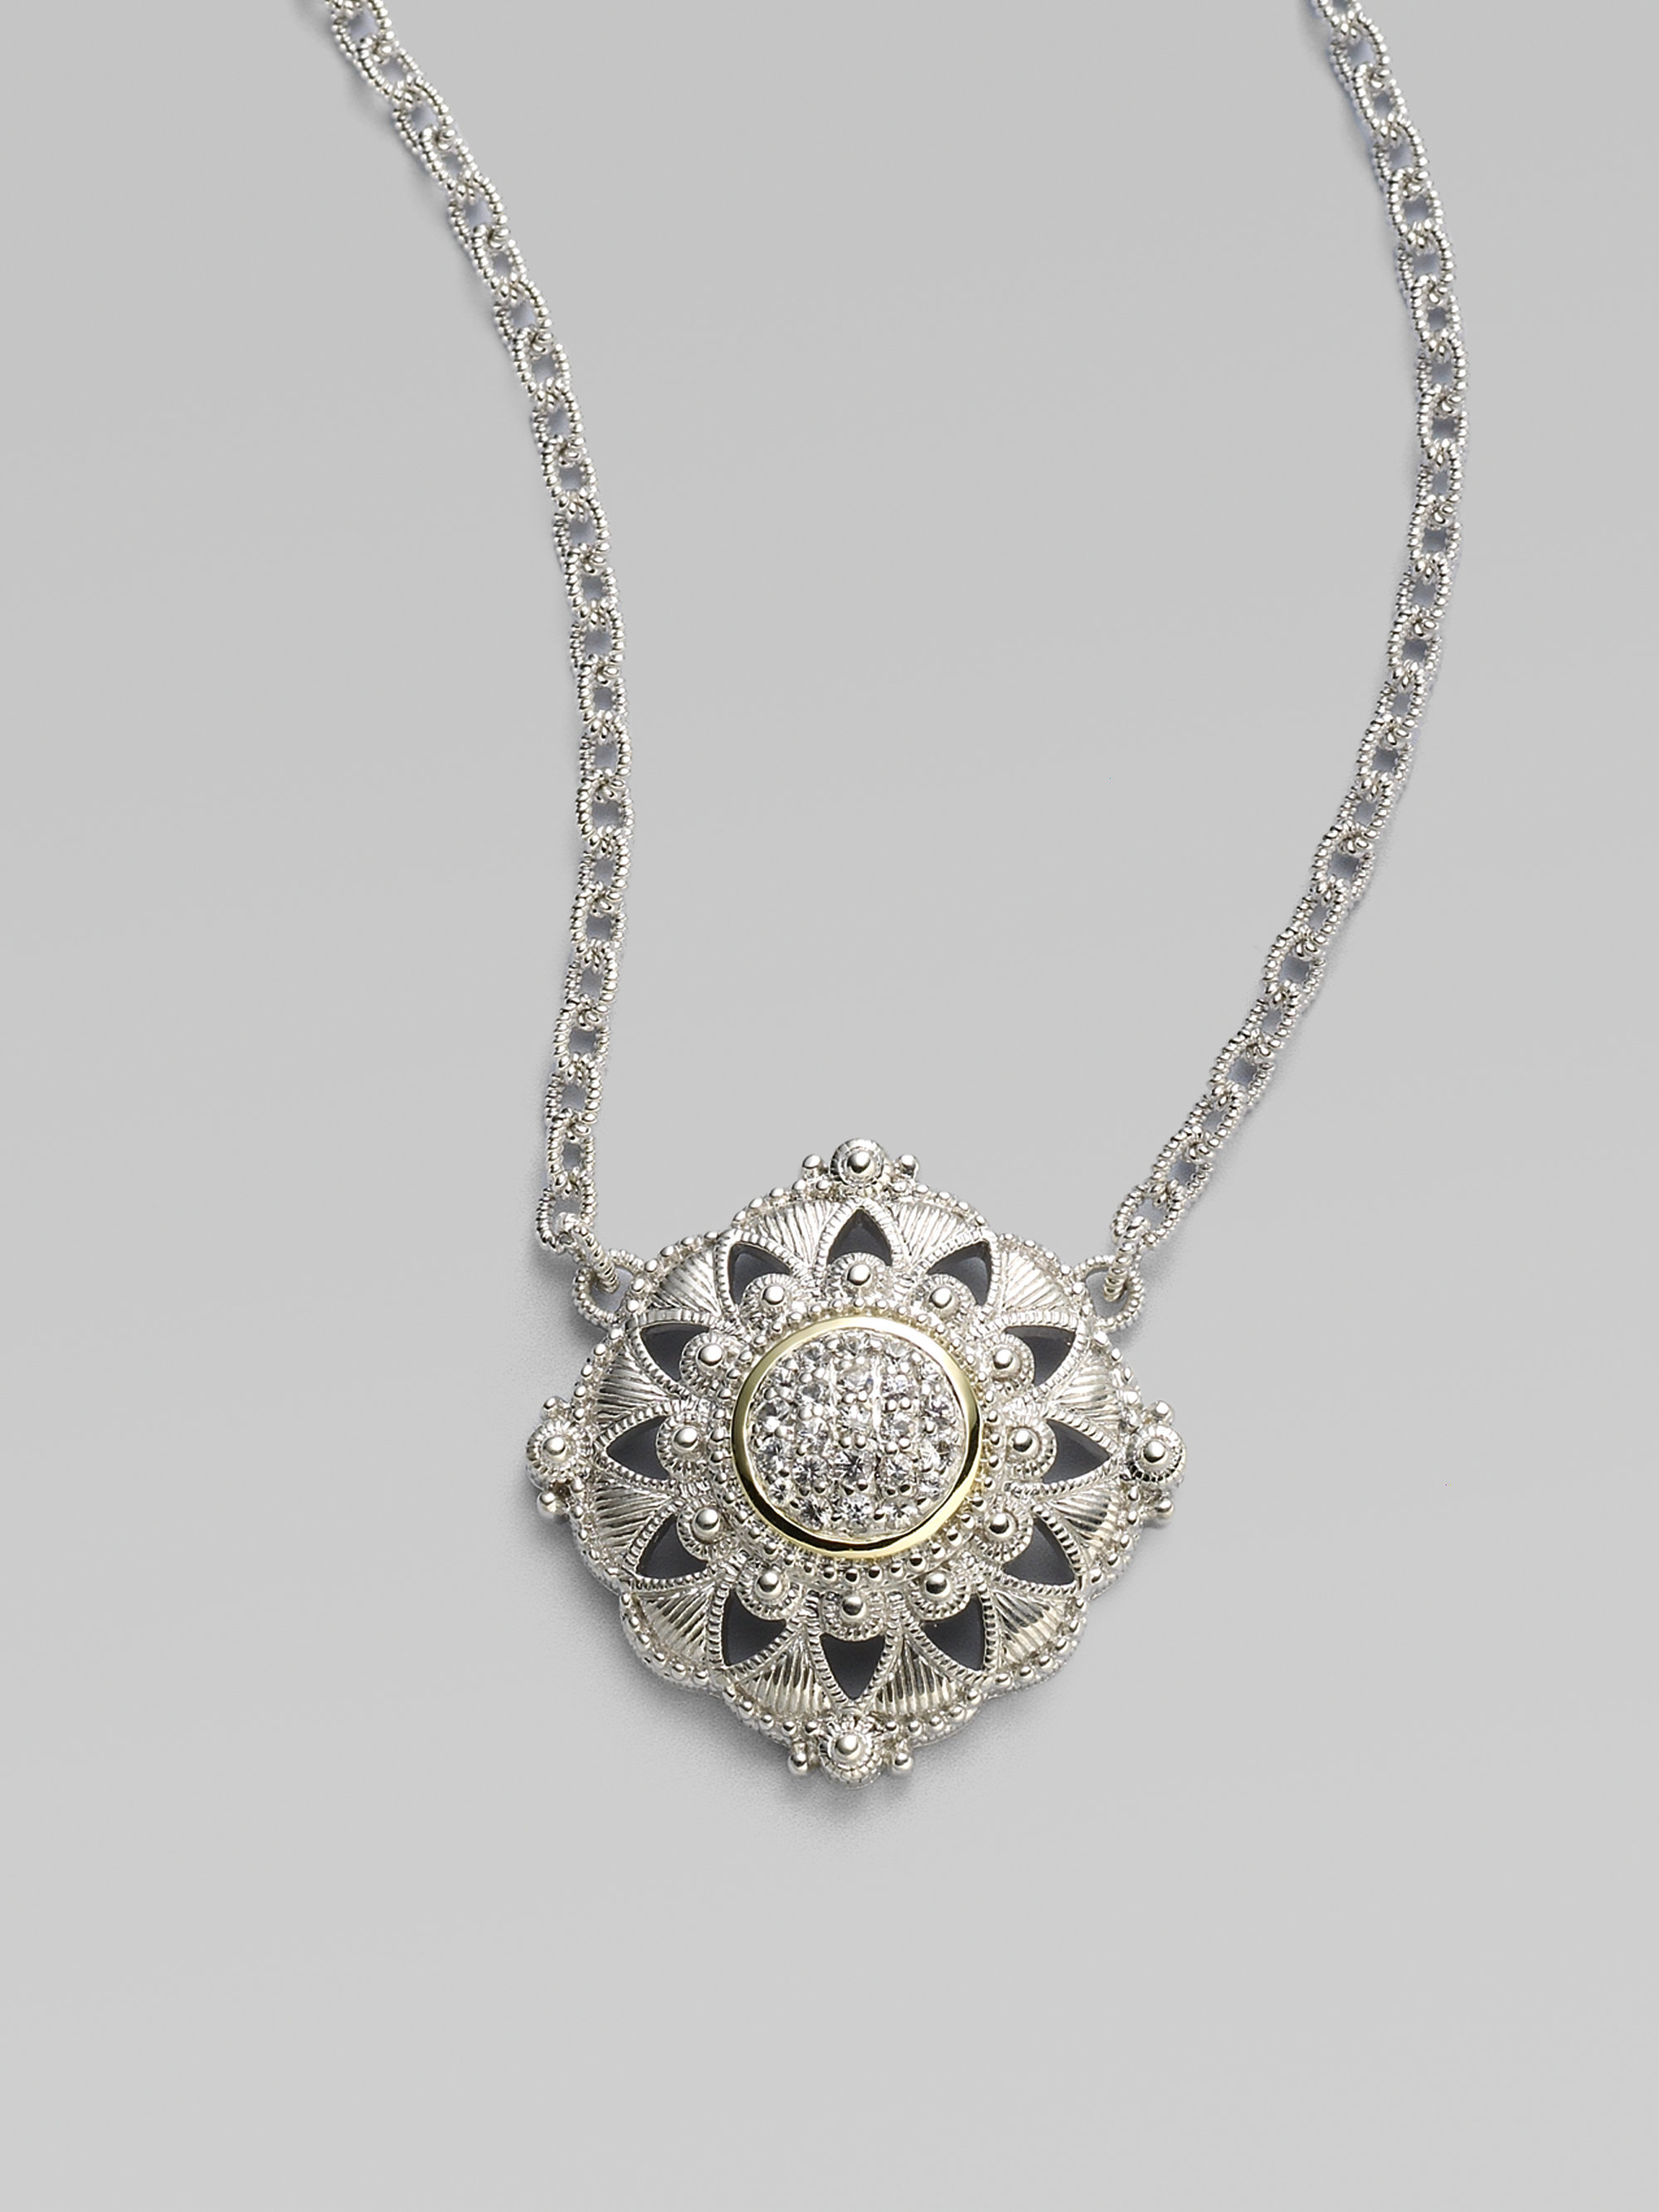 ... White Sapphire, 18K Yellow Gold  Sterling Silver Pendant Necklace